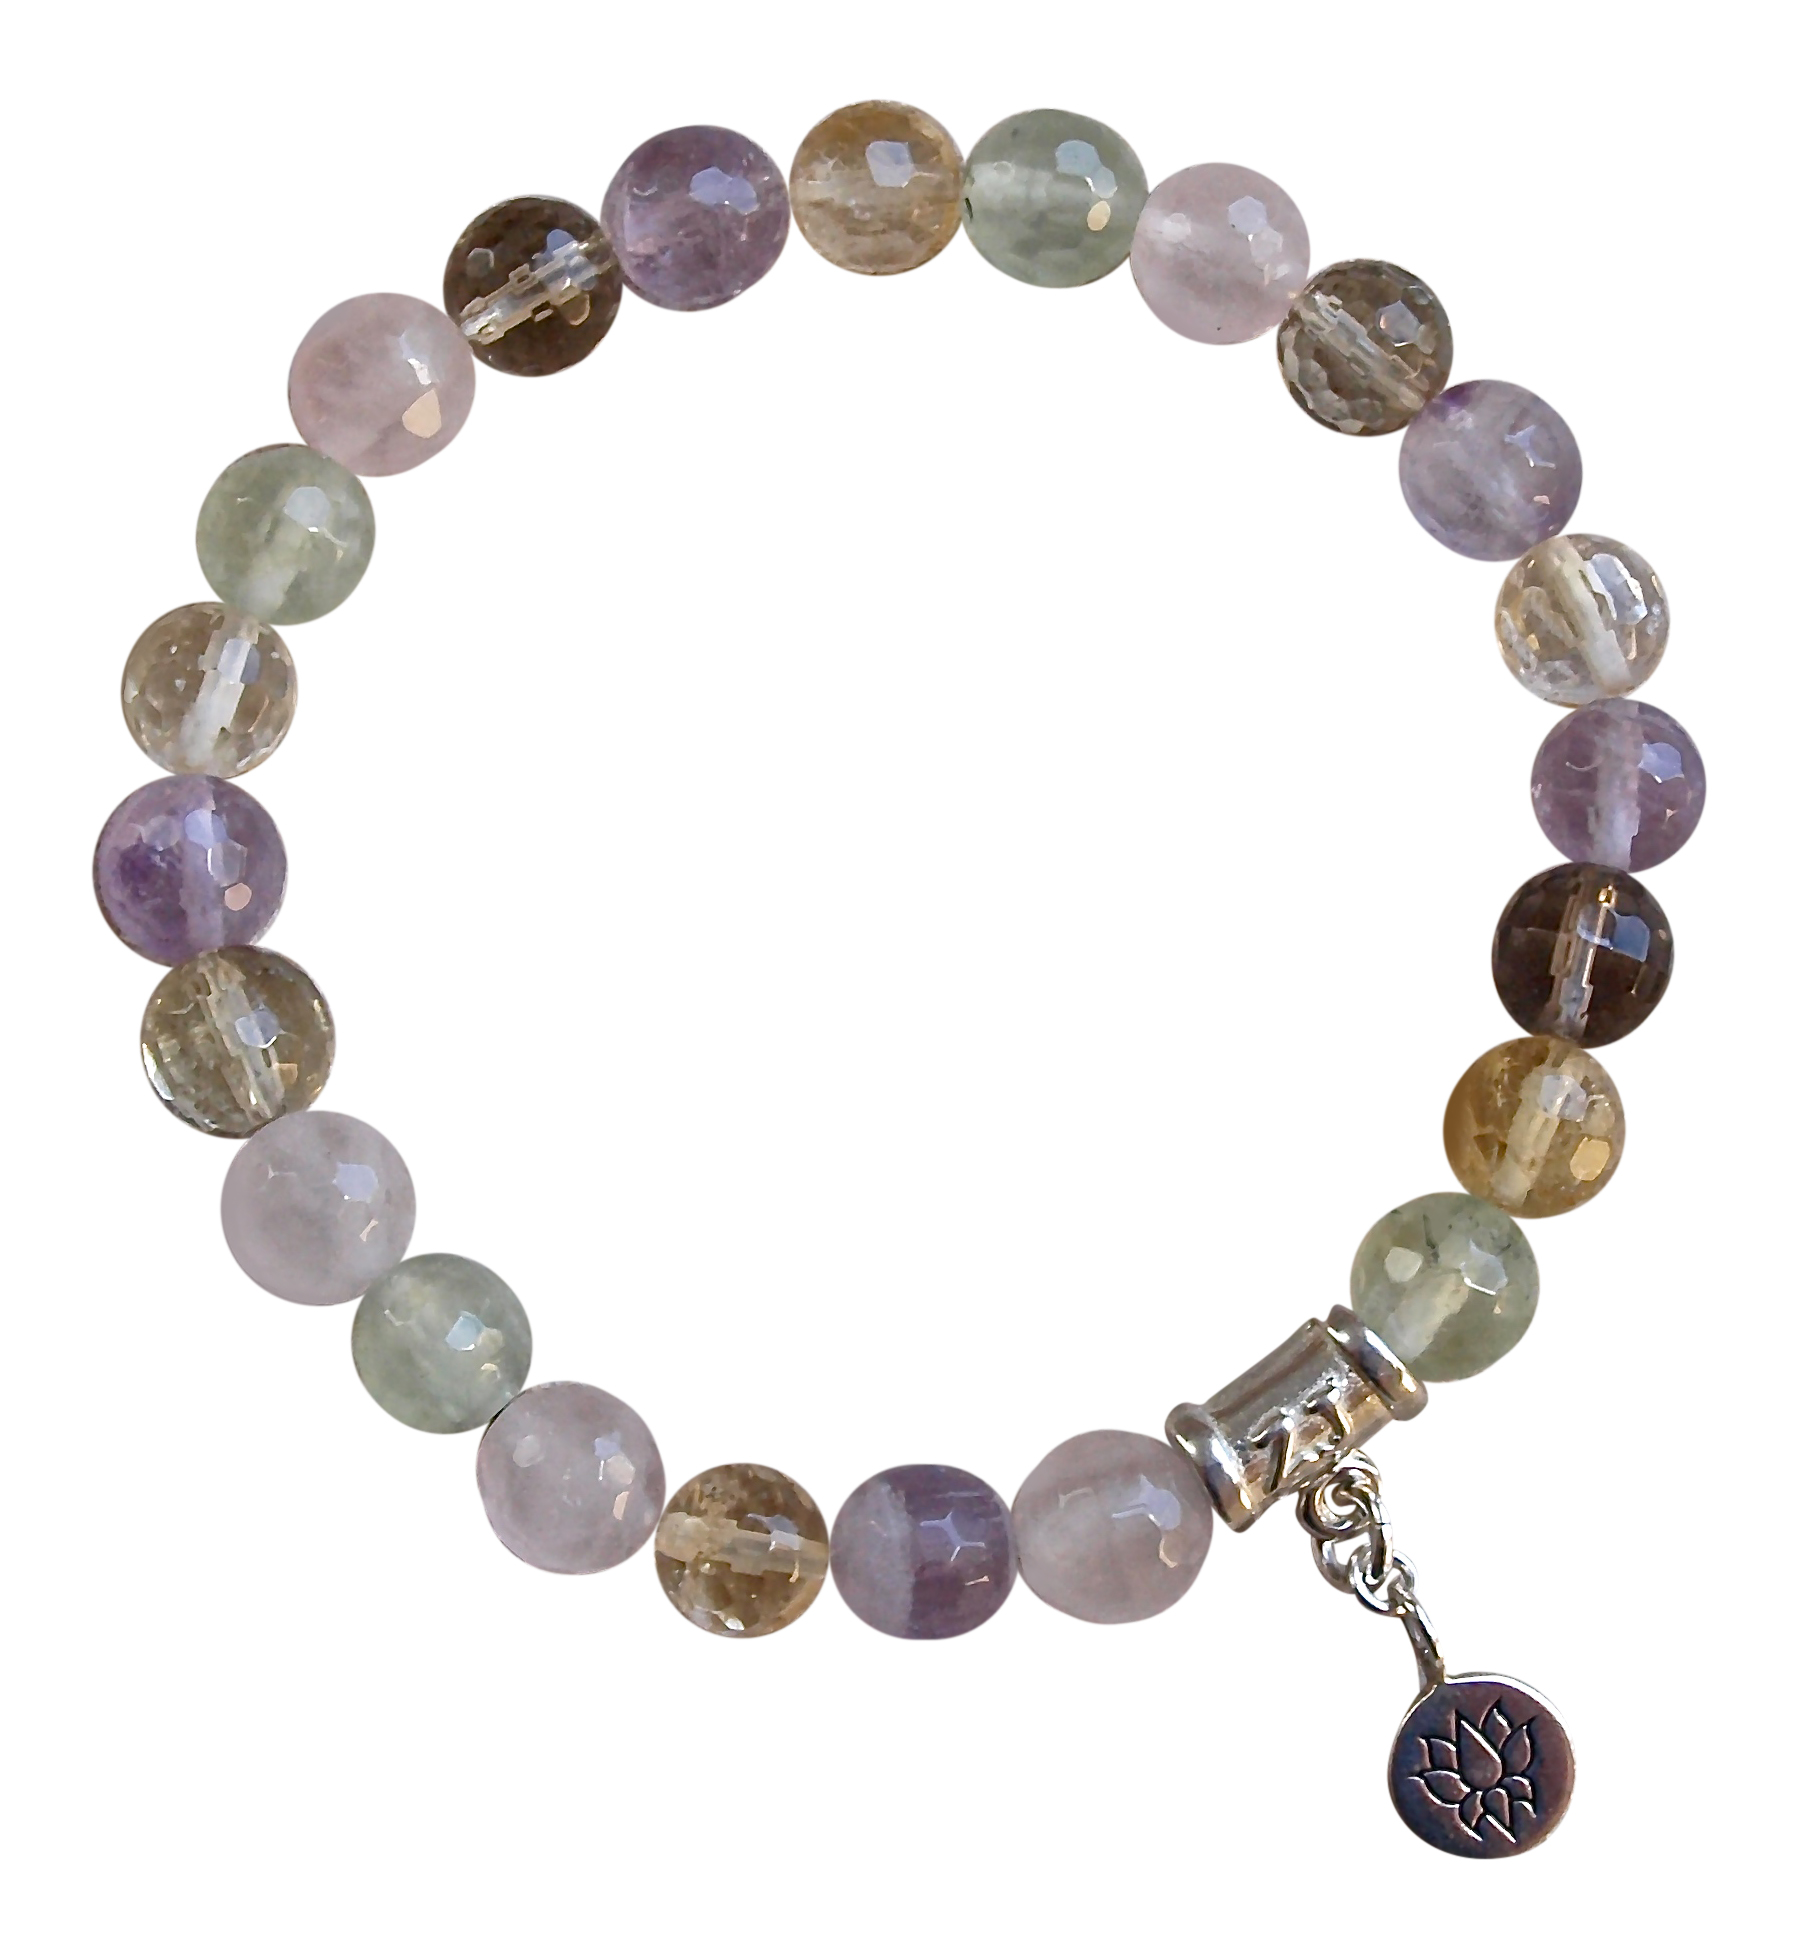 Assorted semi precious gemstone bracelet adorned with a sterling silver lotus charm - spiritual crystals